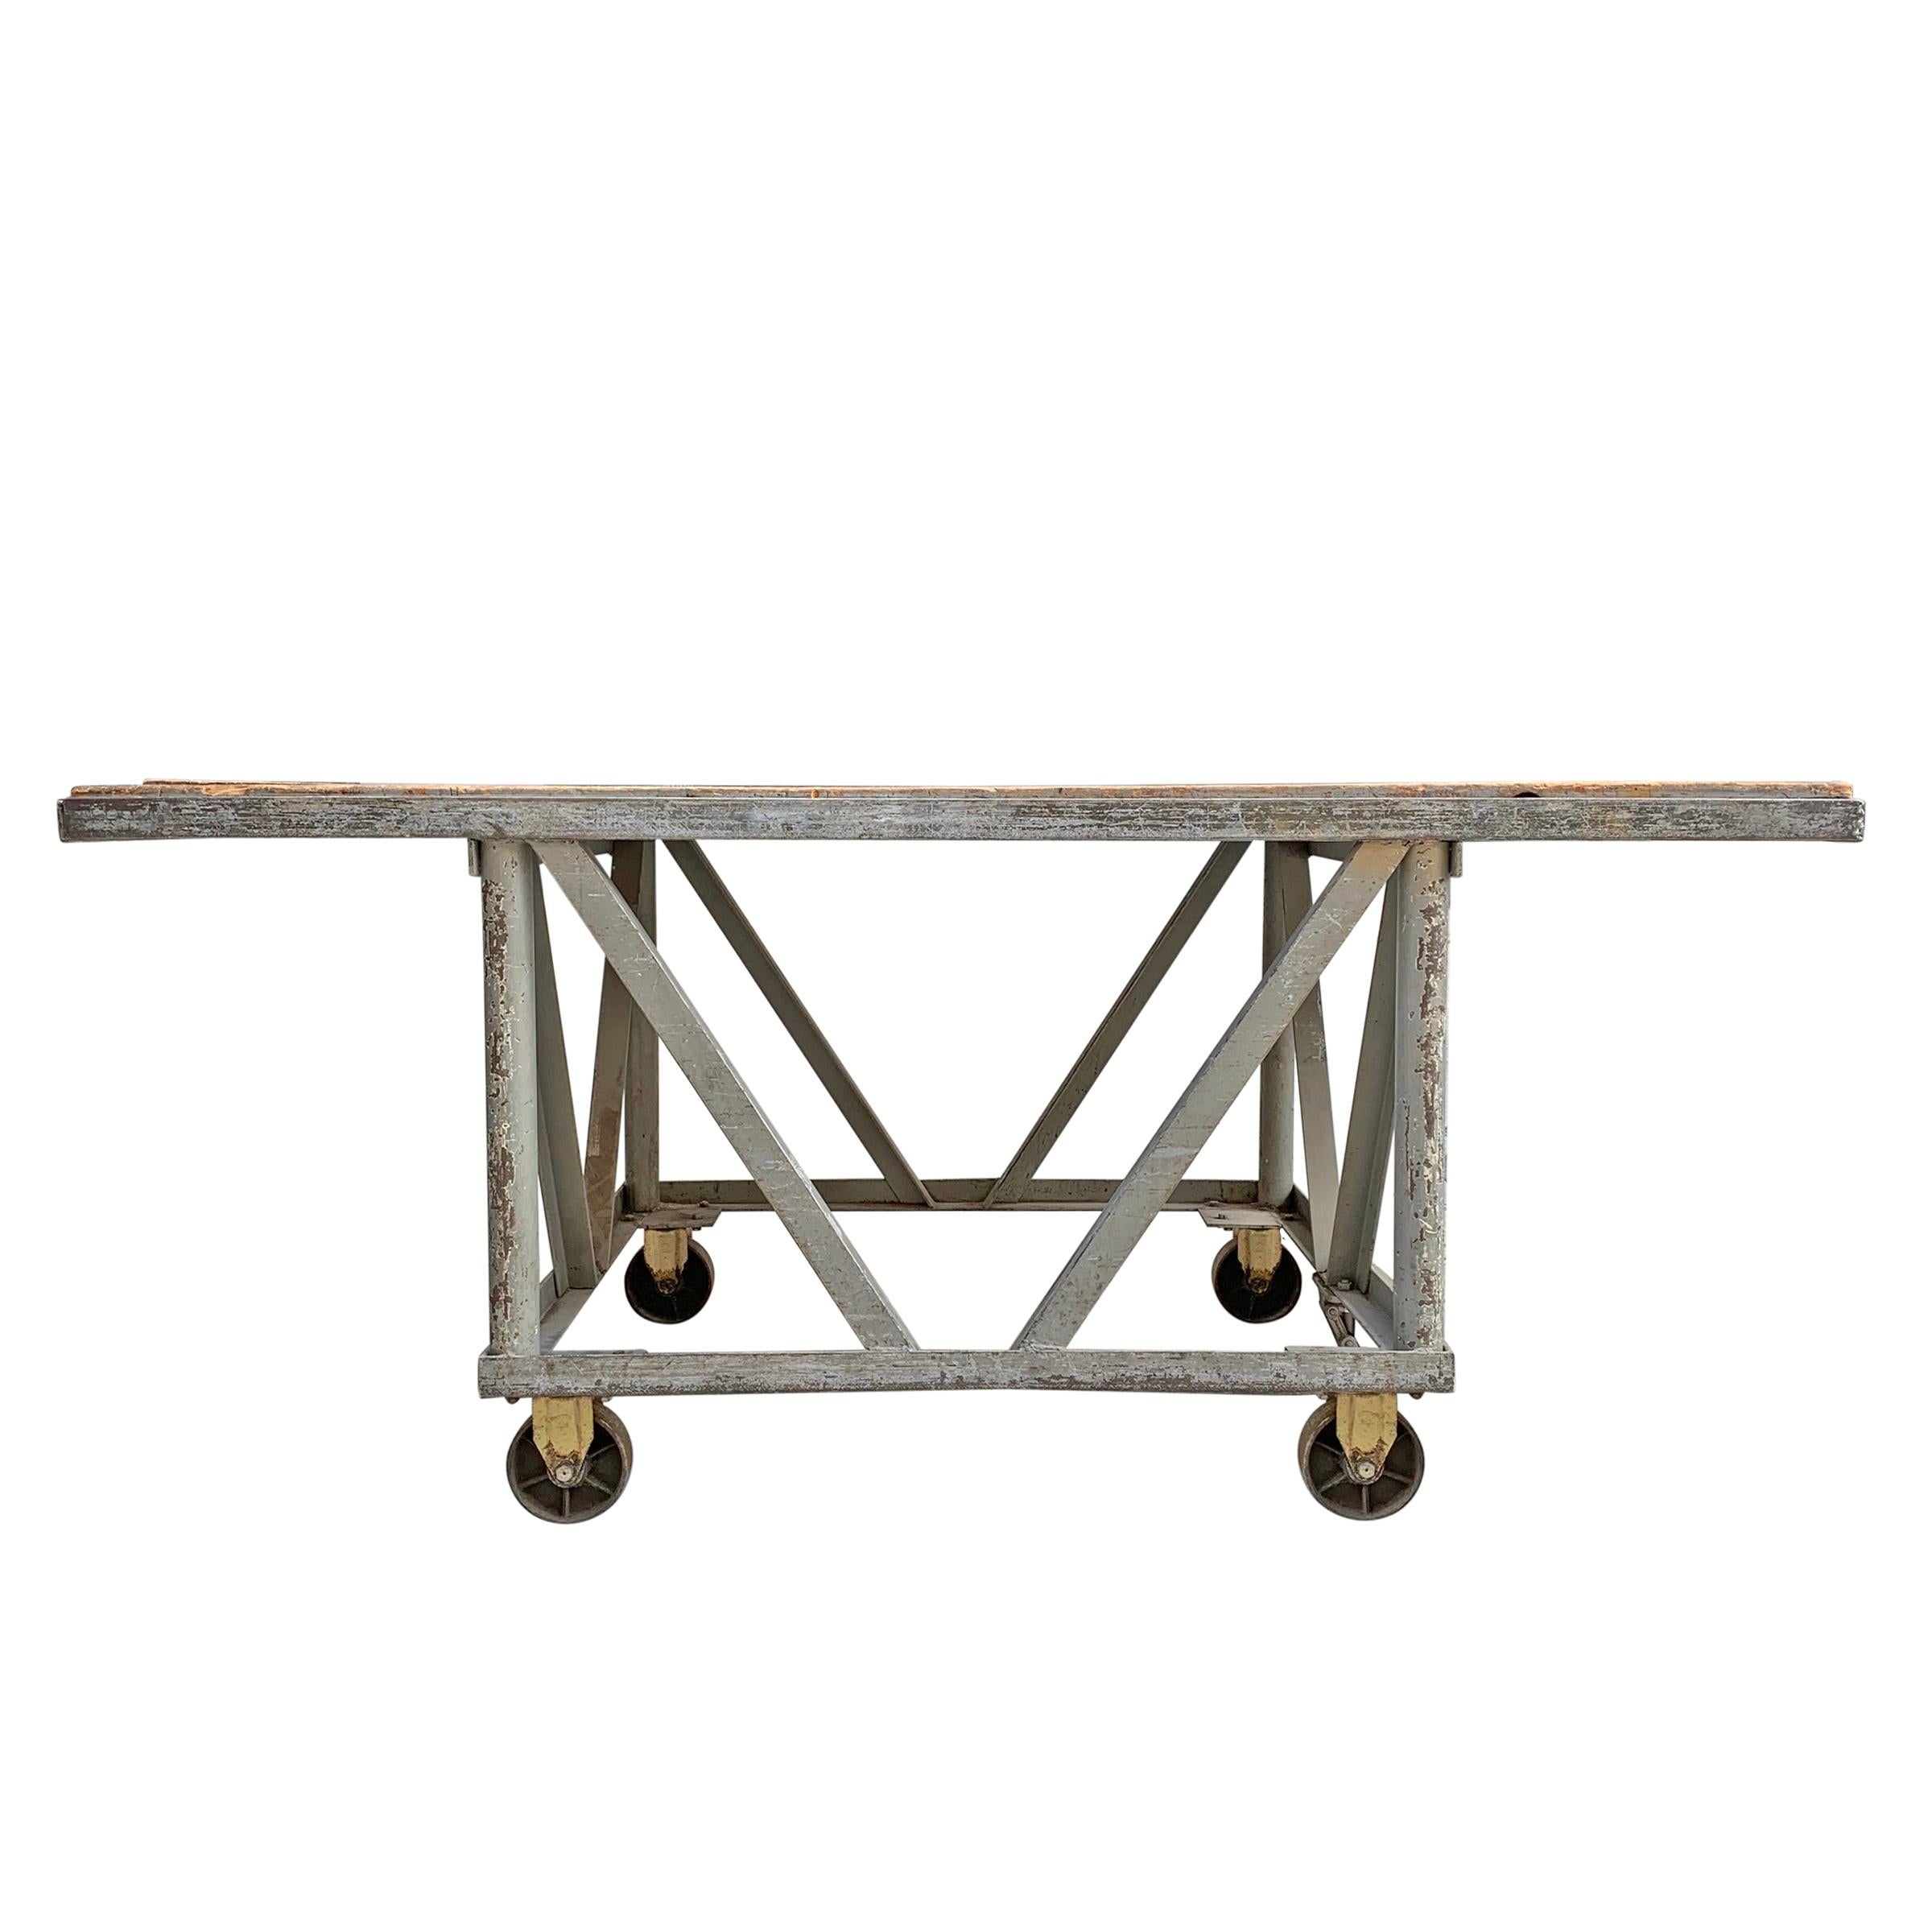 An incredible vintage American industrial table on large iron casters with a plank wood top with a wonderful well-worn surface. A locking mechanism on one side locks the piece in place. We can't wait for someone to place this in a kitchen! It